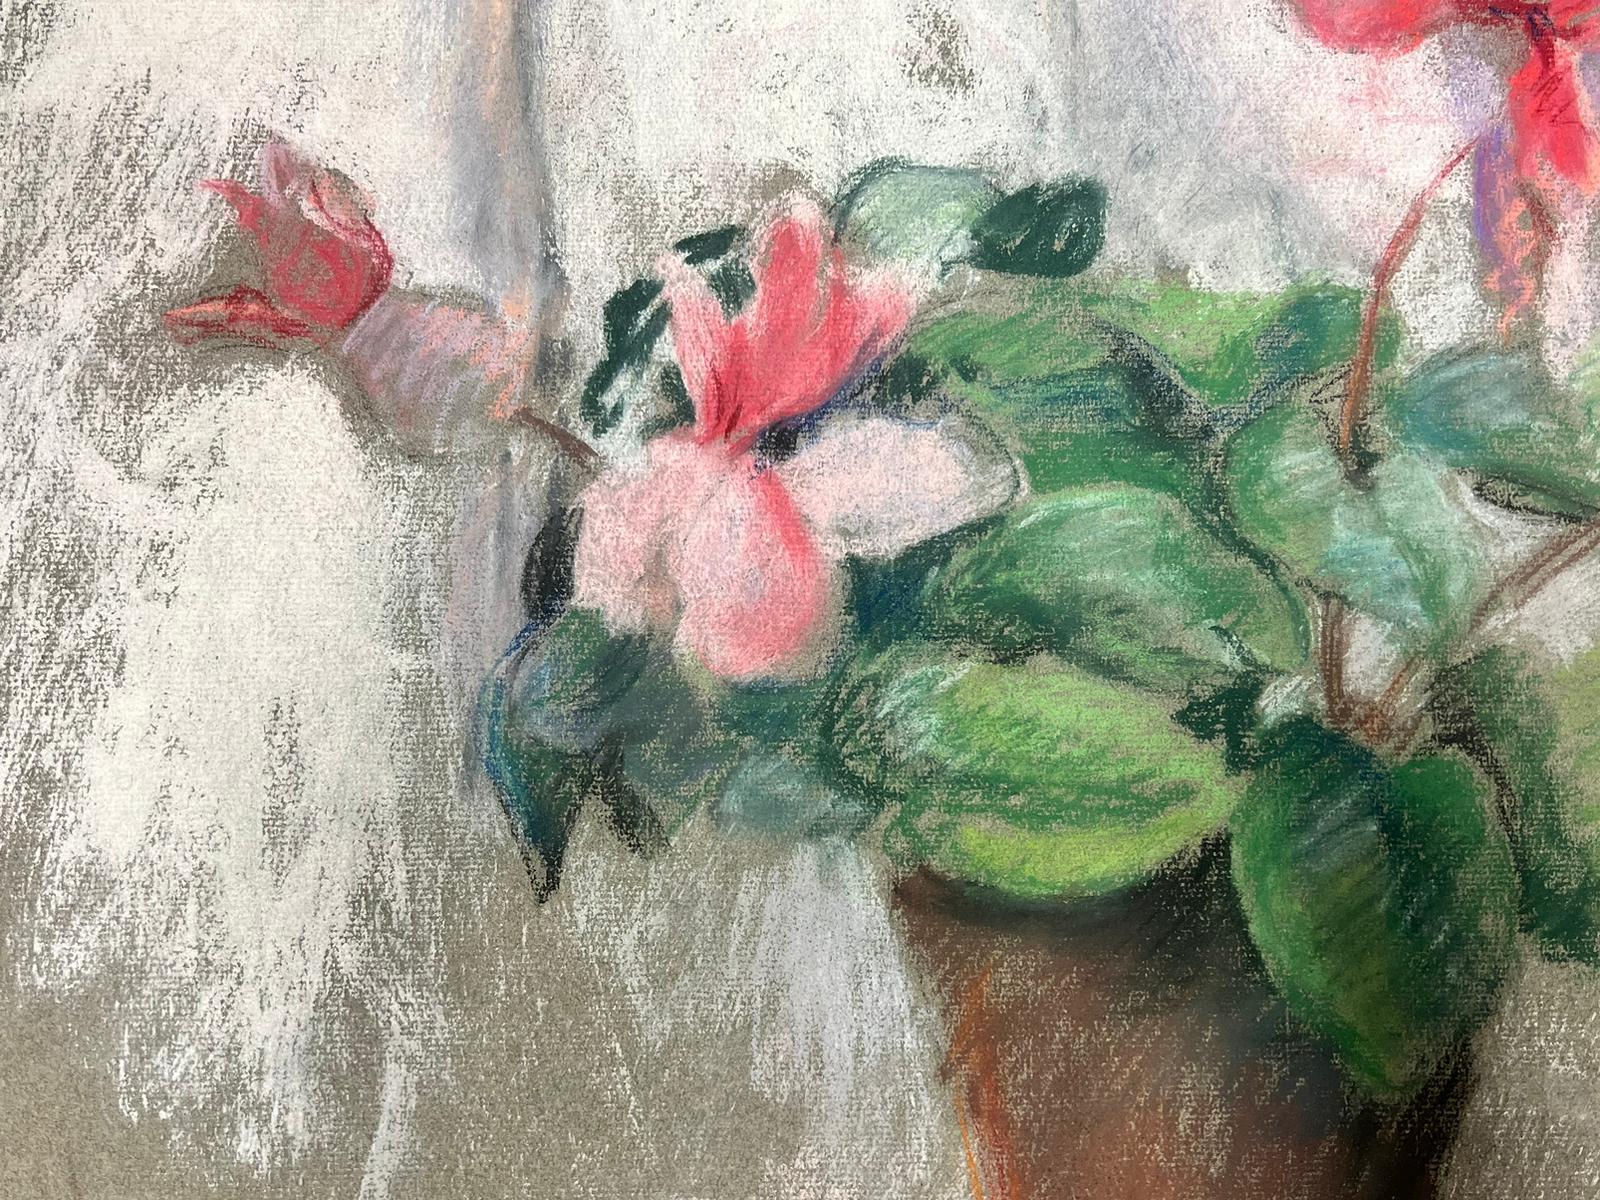 The Flower Pot
by Josine Vignon (French 1922-2022) 
signed
pastel on paper, unframed
painting: 19 x 25 inches
good condition
provenance: from the artists estate, France

Josine Vignon (1922-2022) was a French artist living on the Rue Beautreillis in